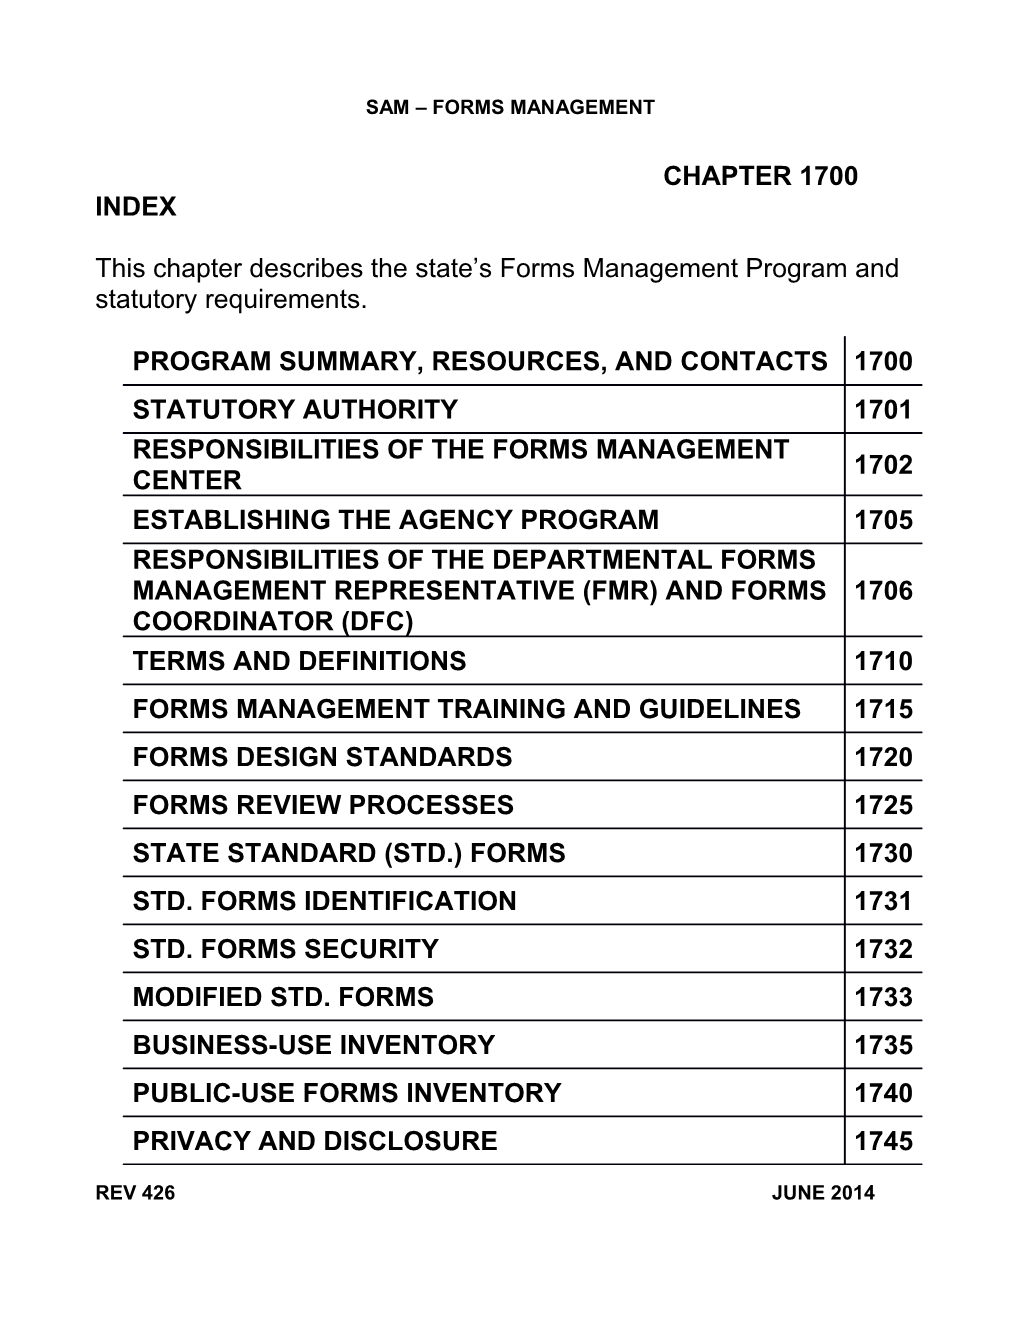 This Chapter Describes the State S Forms Management Program and Statutory Requirements